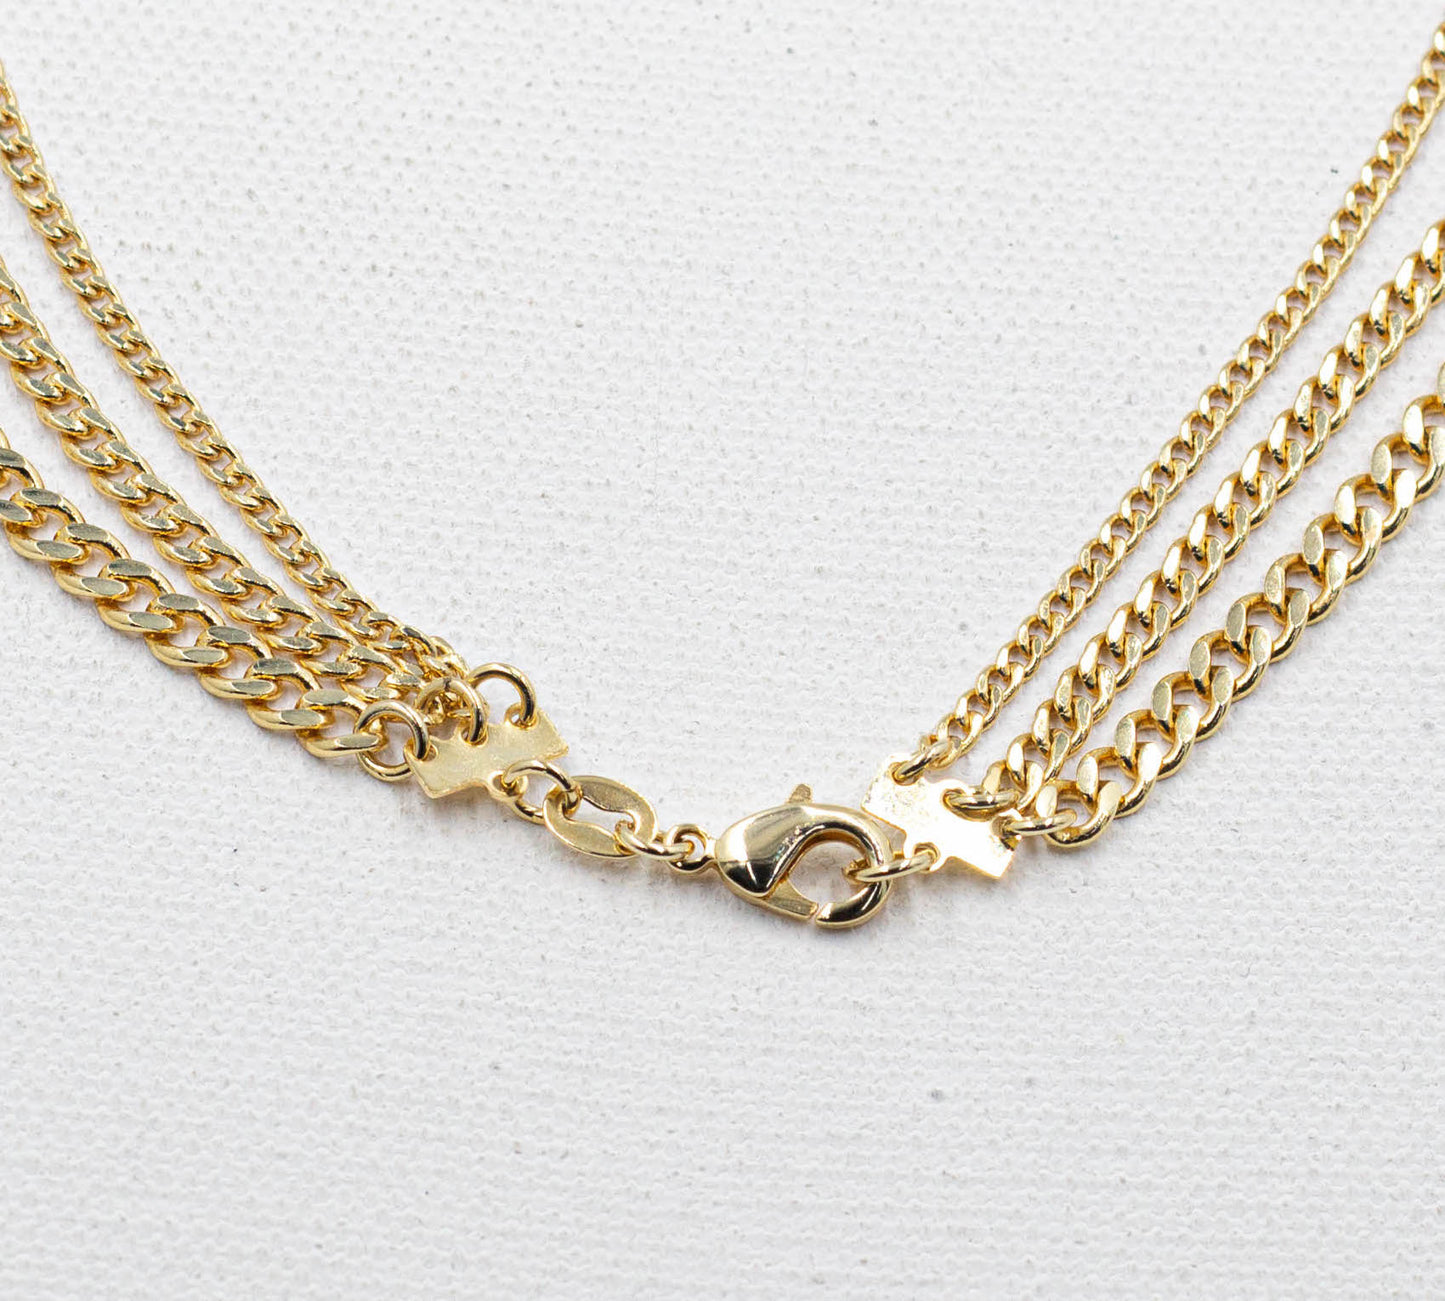 Triple Cuban Link Necklace and Earrings set